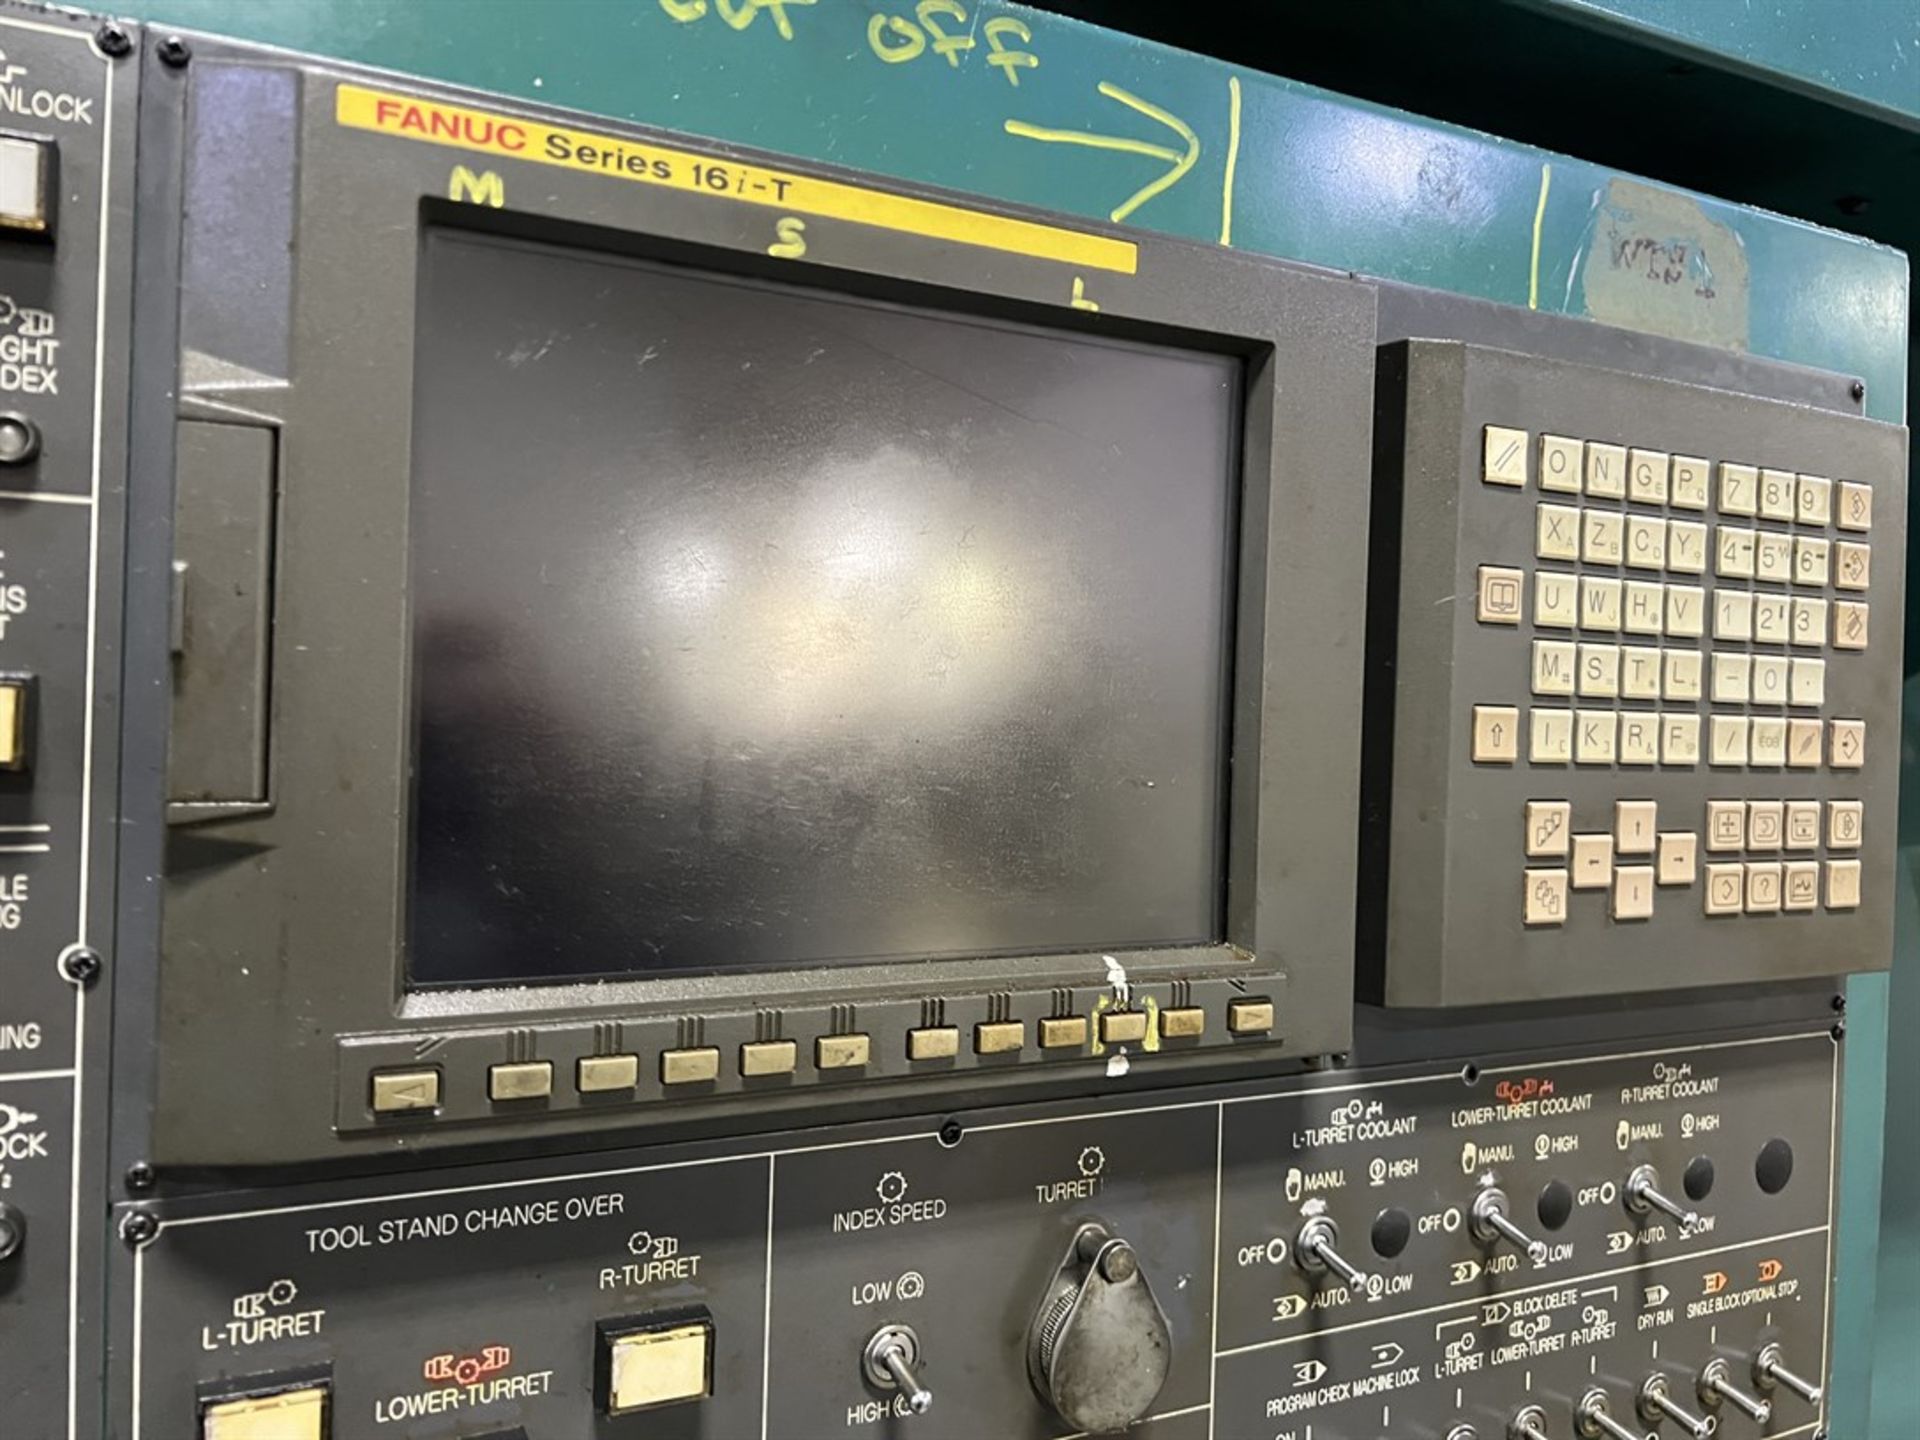 NAKAMURA-TOME WTS-150 CNC Turning Center, s/n V150601, Fanuc 16i-T Control, 12.20" Max Turning - Image 11 of 13